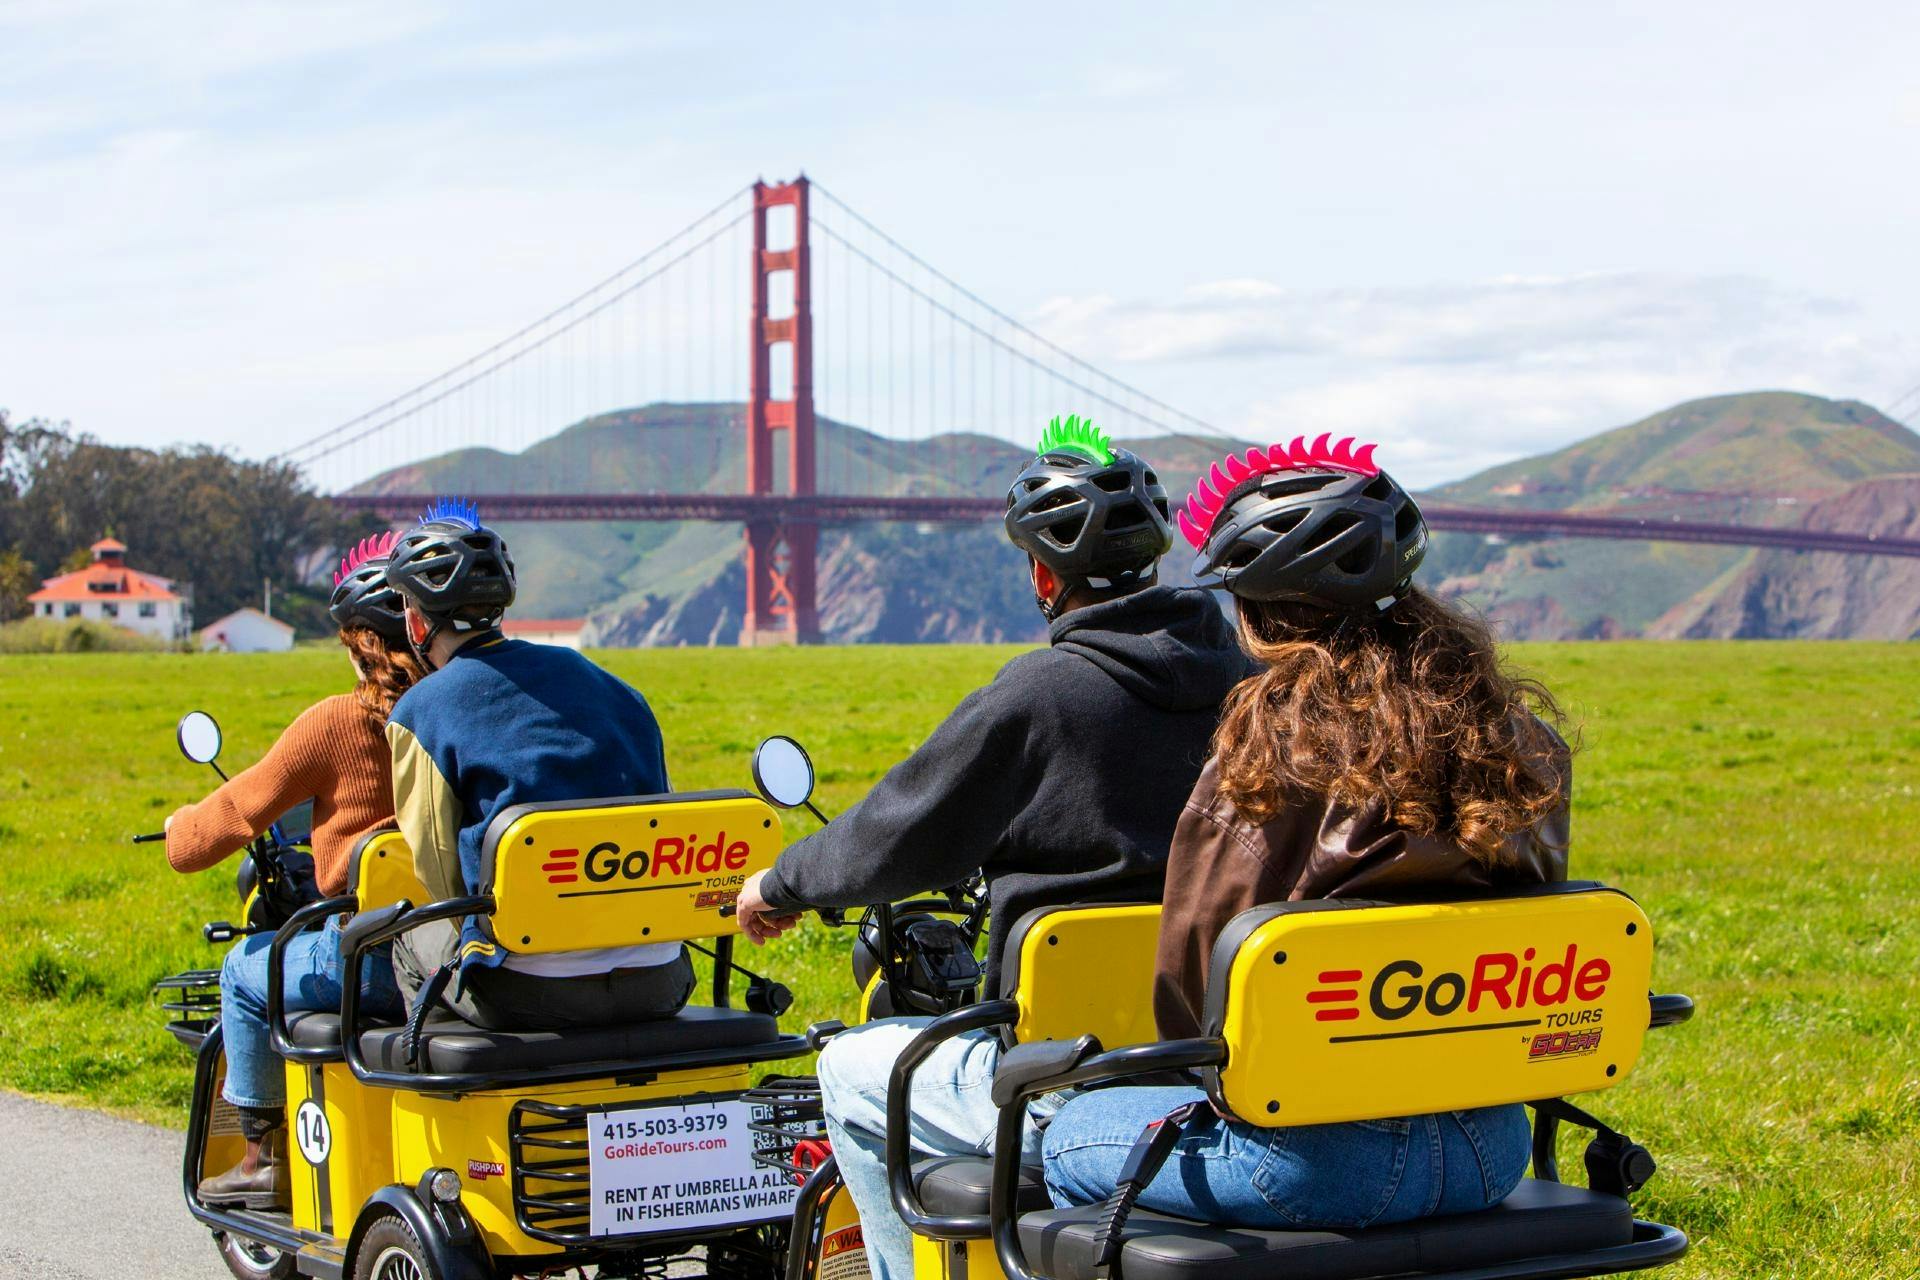 Electric Scooter Rental with GPS-Narrated Tour to Golden Gate Bridge